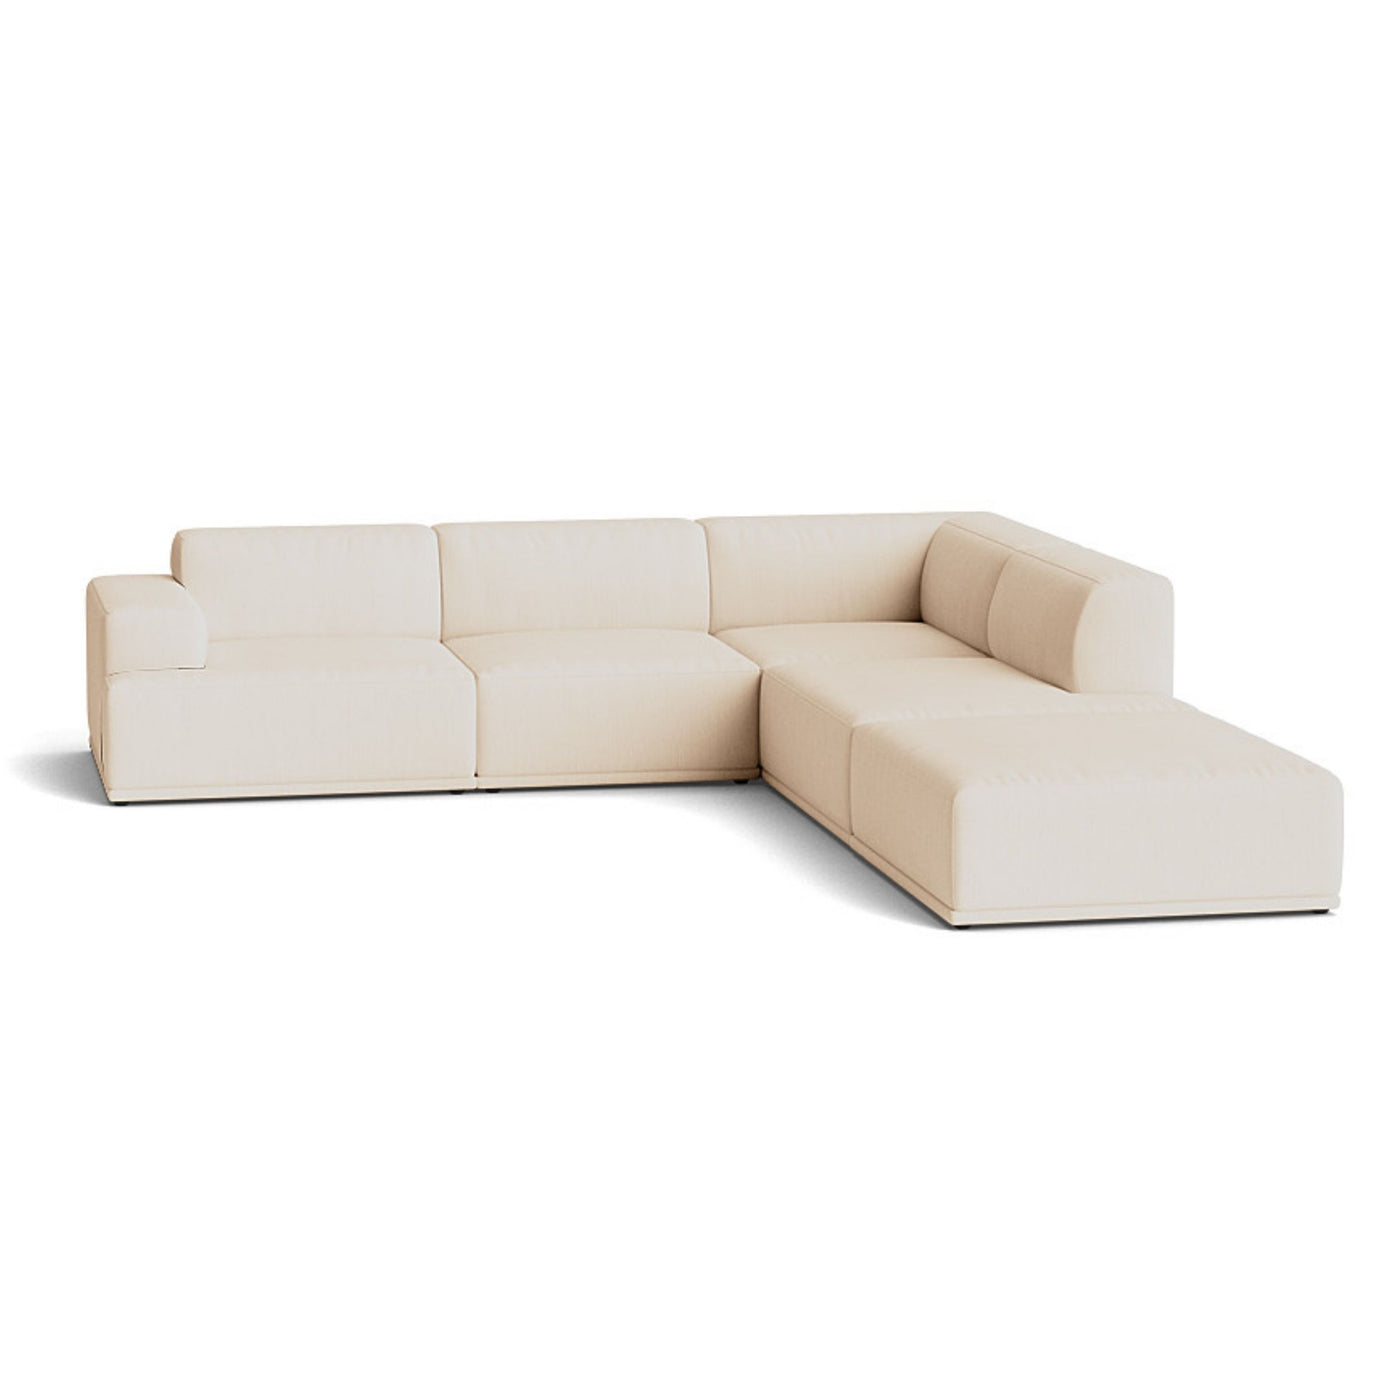 Muuto Connect Soft Modular Corner Sofa, configuration 2. Made-to-order from someday designs. #colour_balder-612